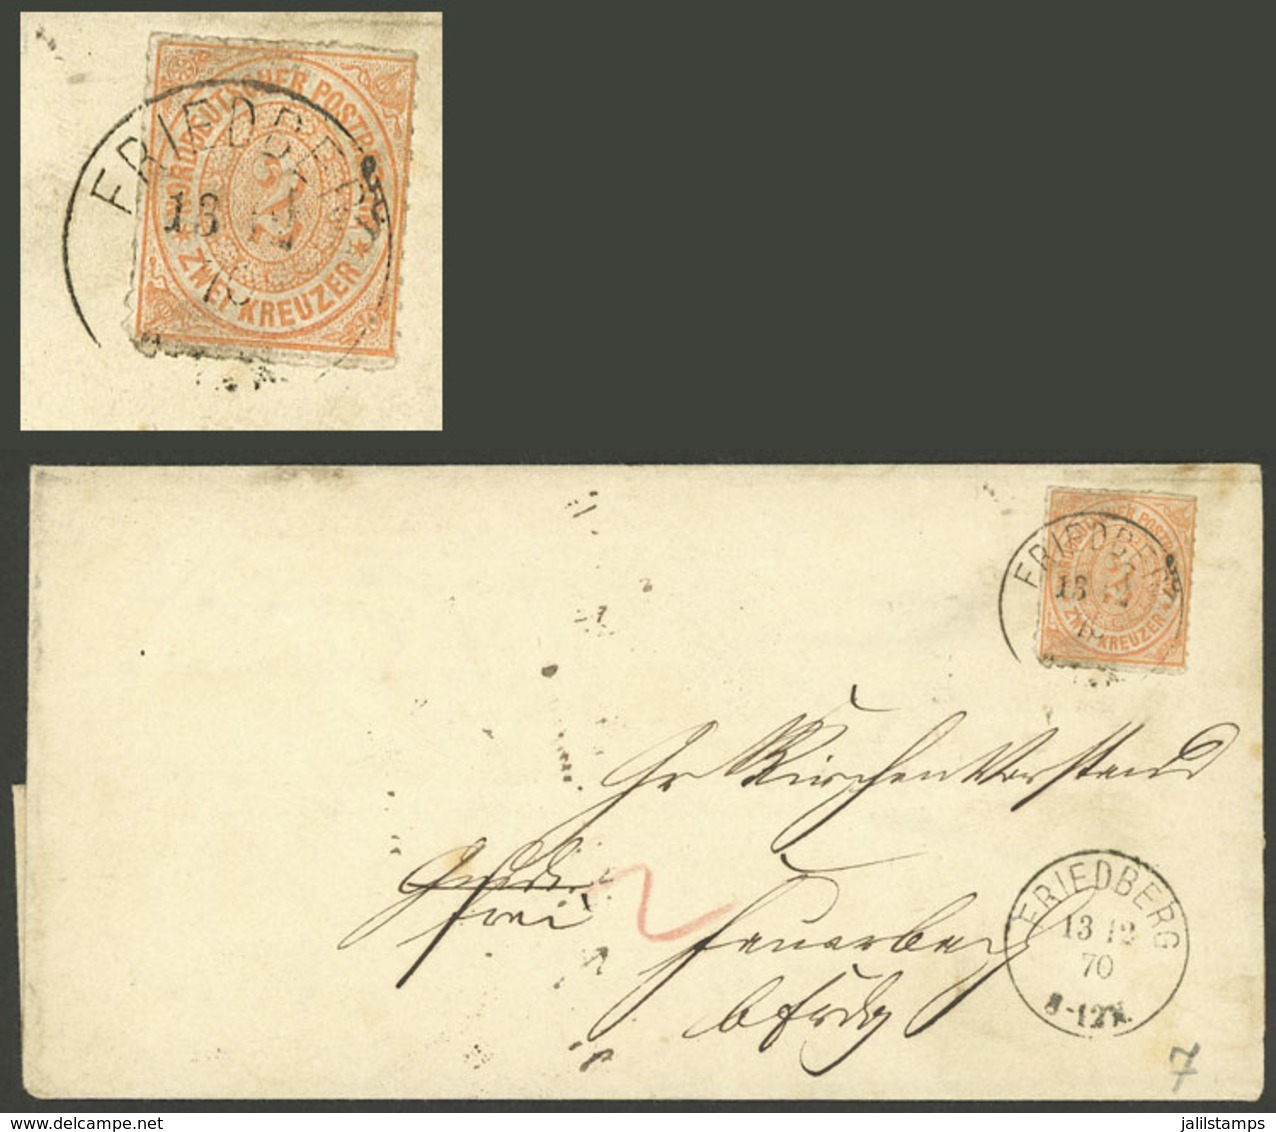 GERMANY: NORTH GERMAN CONFEDERATION: 13/DE/1870 Friedberg - ?, Folded Cover Franked By Sc.8 Alone, Very Nice! - Vorphilatelie